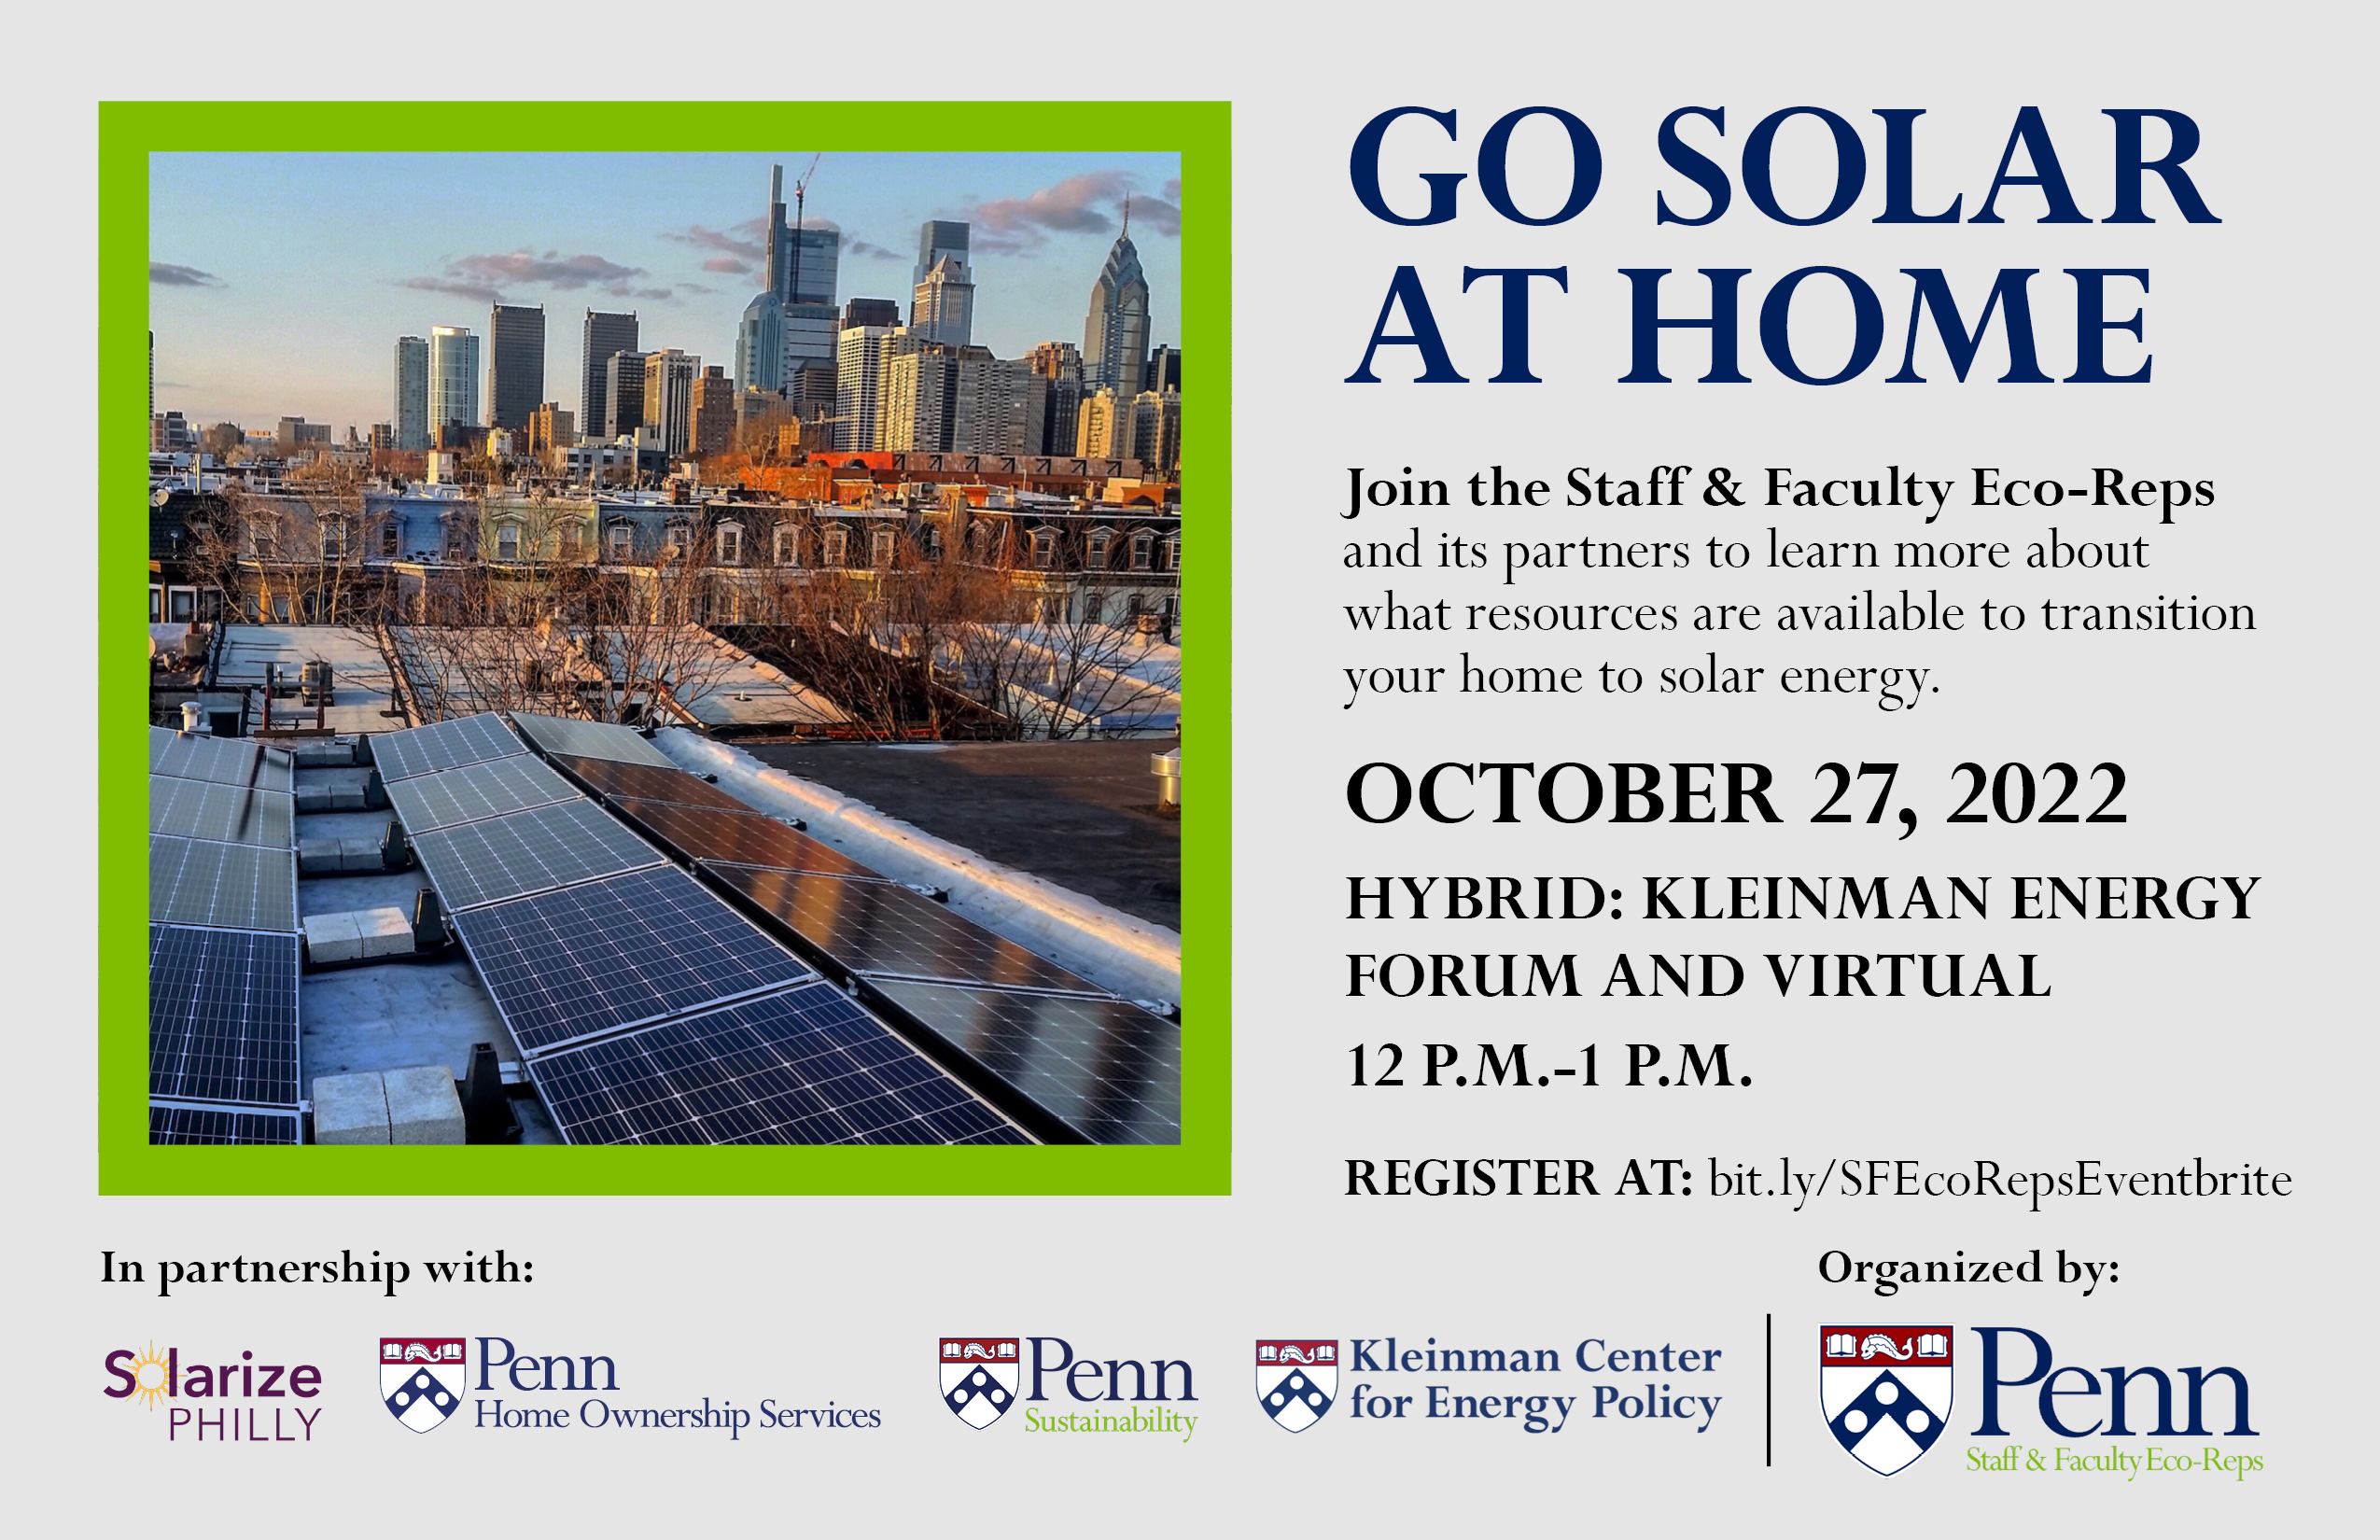 Go Solar at Home Event